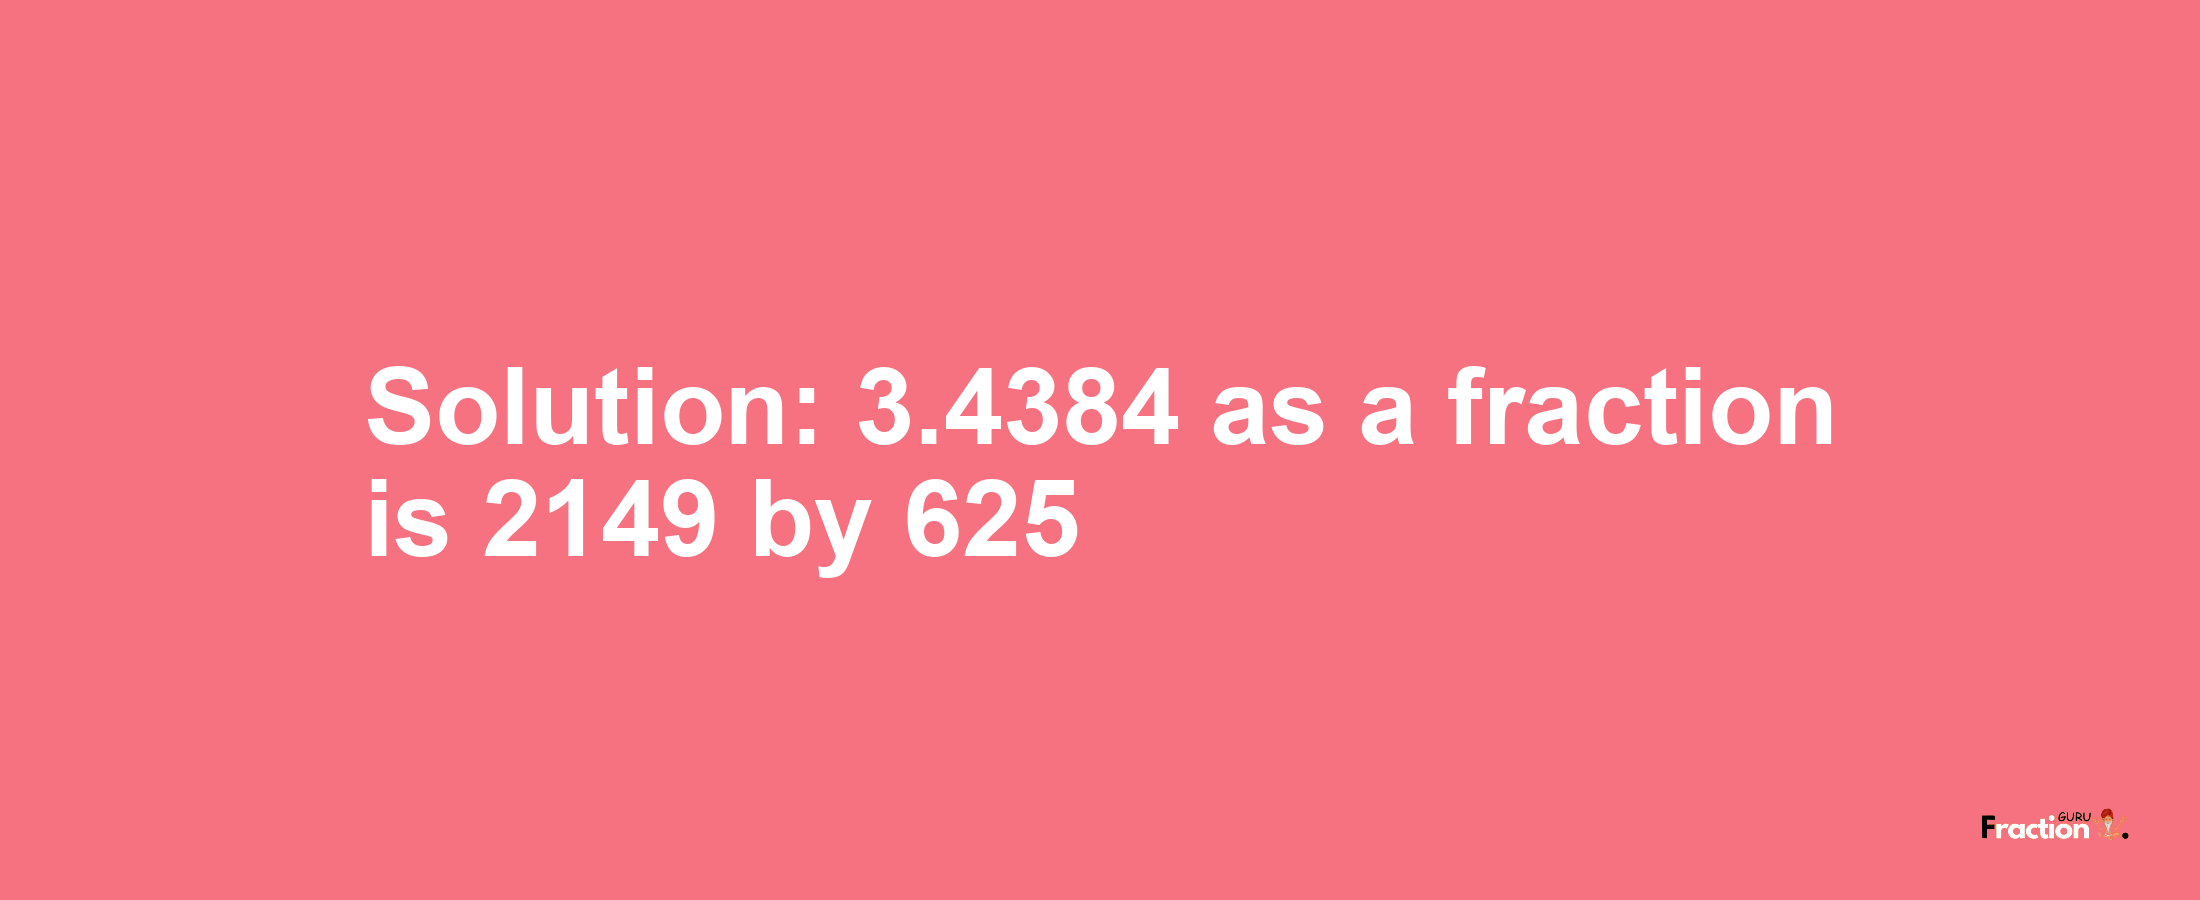 Solution:3.4384 as a fraction is 2149/625